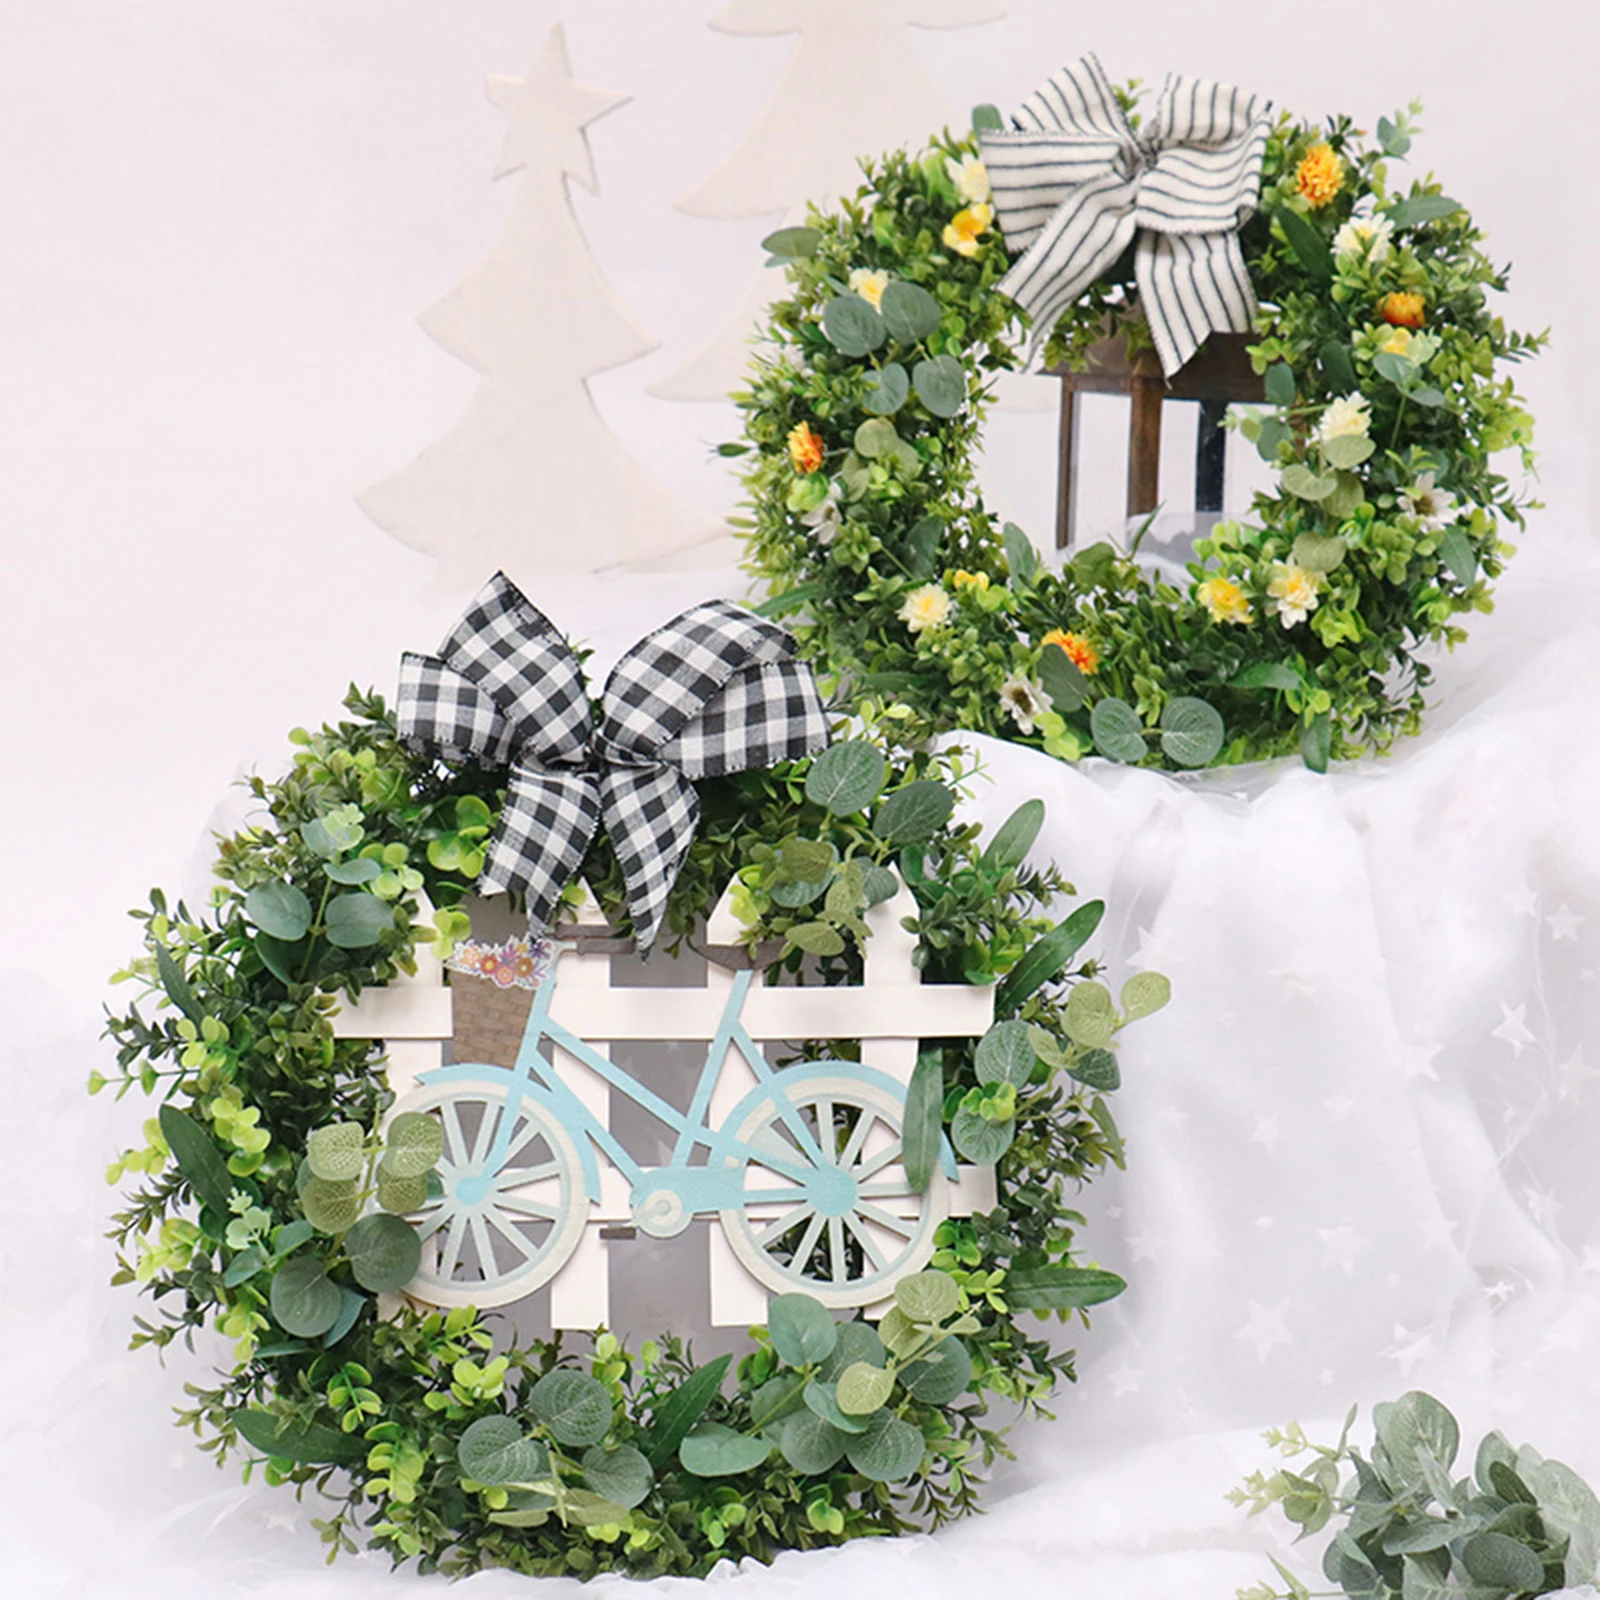 

48cm Spring Wreath with Bowknot Artificial Flower Green Leaves Garland Front Door Porch Welcome Sign Wall Hanging Home Decor